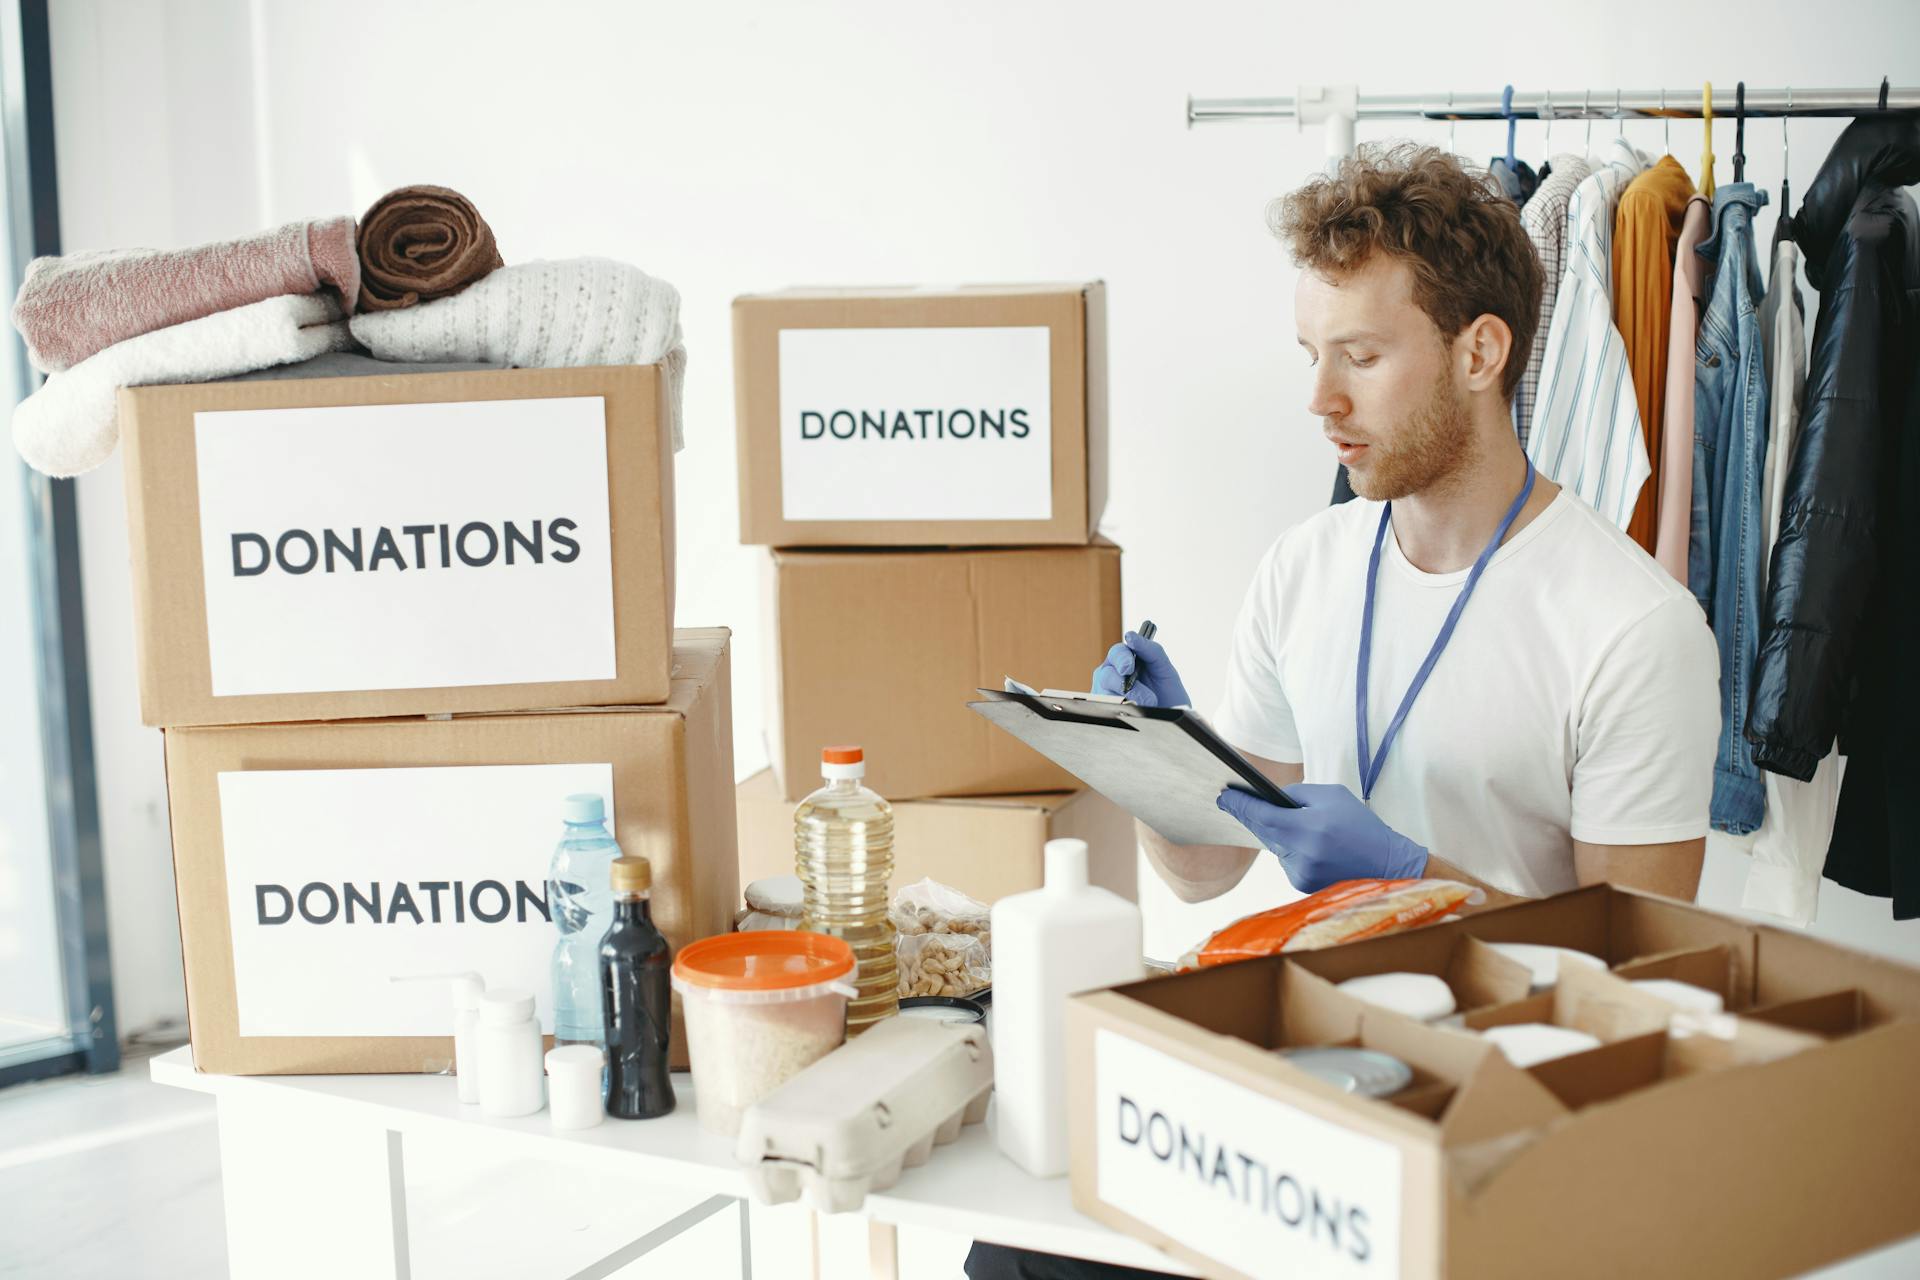 A charity worker checking donation boxes | Source: Pexels